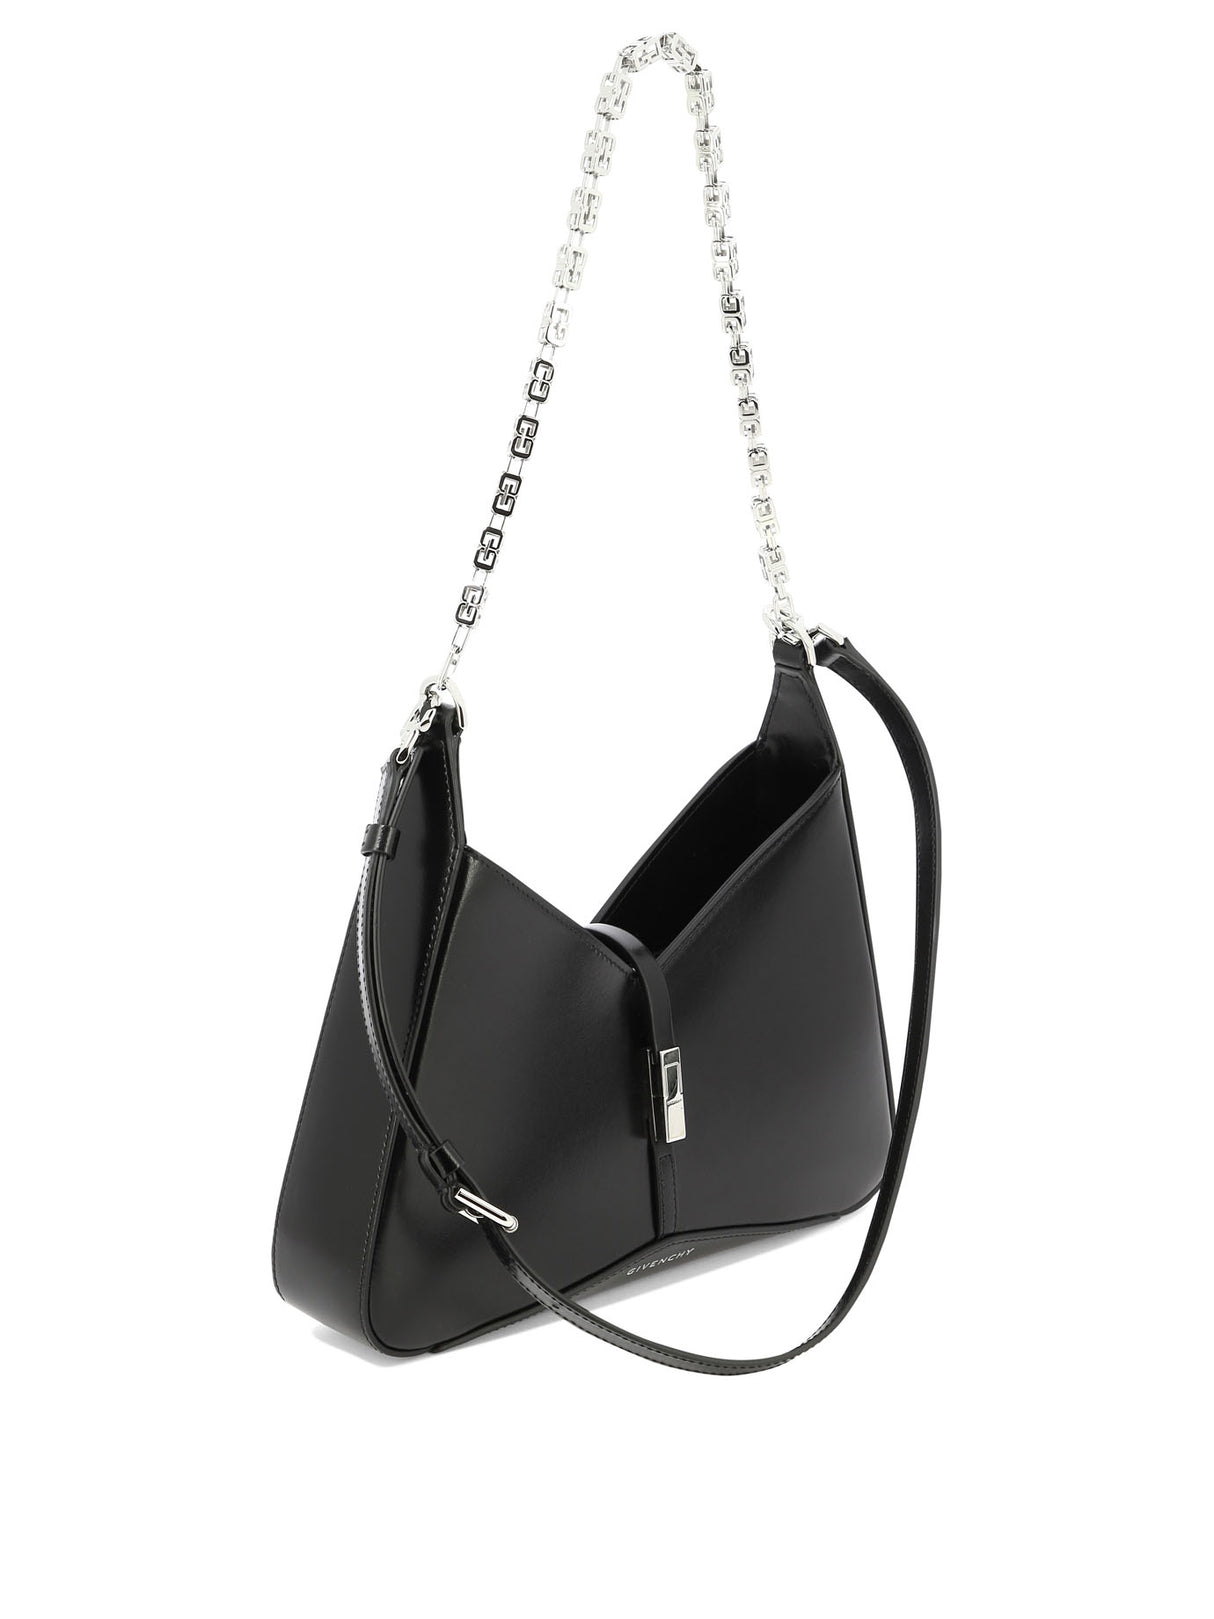 Black Shoulder Bag with Cut Out Details and G Cube Chain